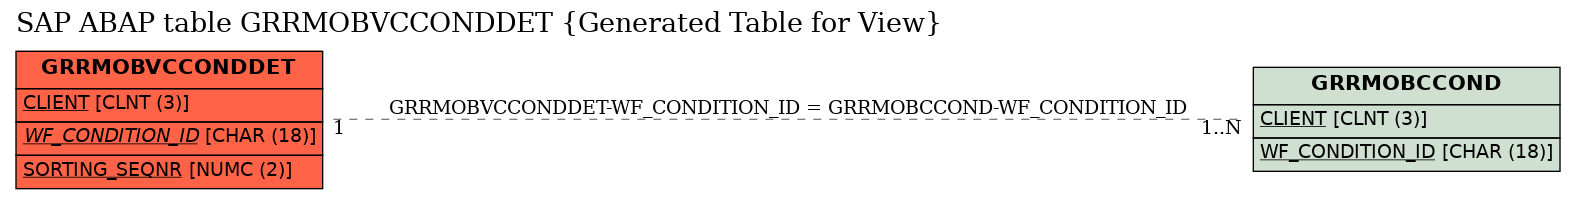 E-R Diagram for table GRRMOBVCCONDDET (Generated Table for View)